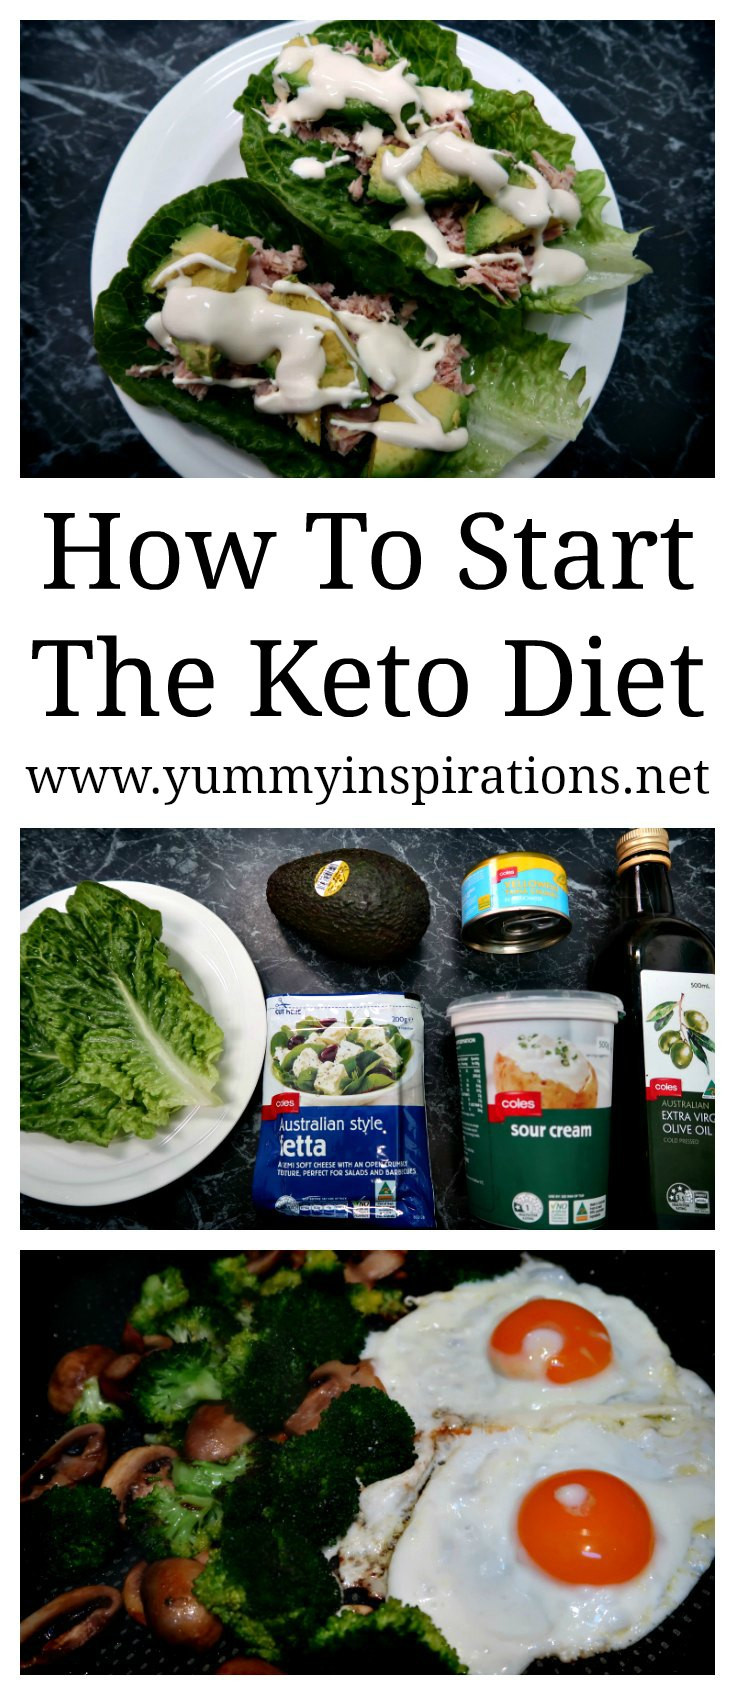 How To Start A Keto Diet Plan
 How To Start The Keto Diet Tips to help you started